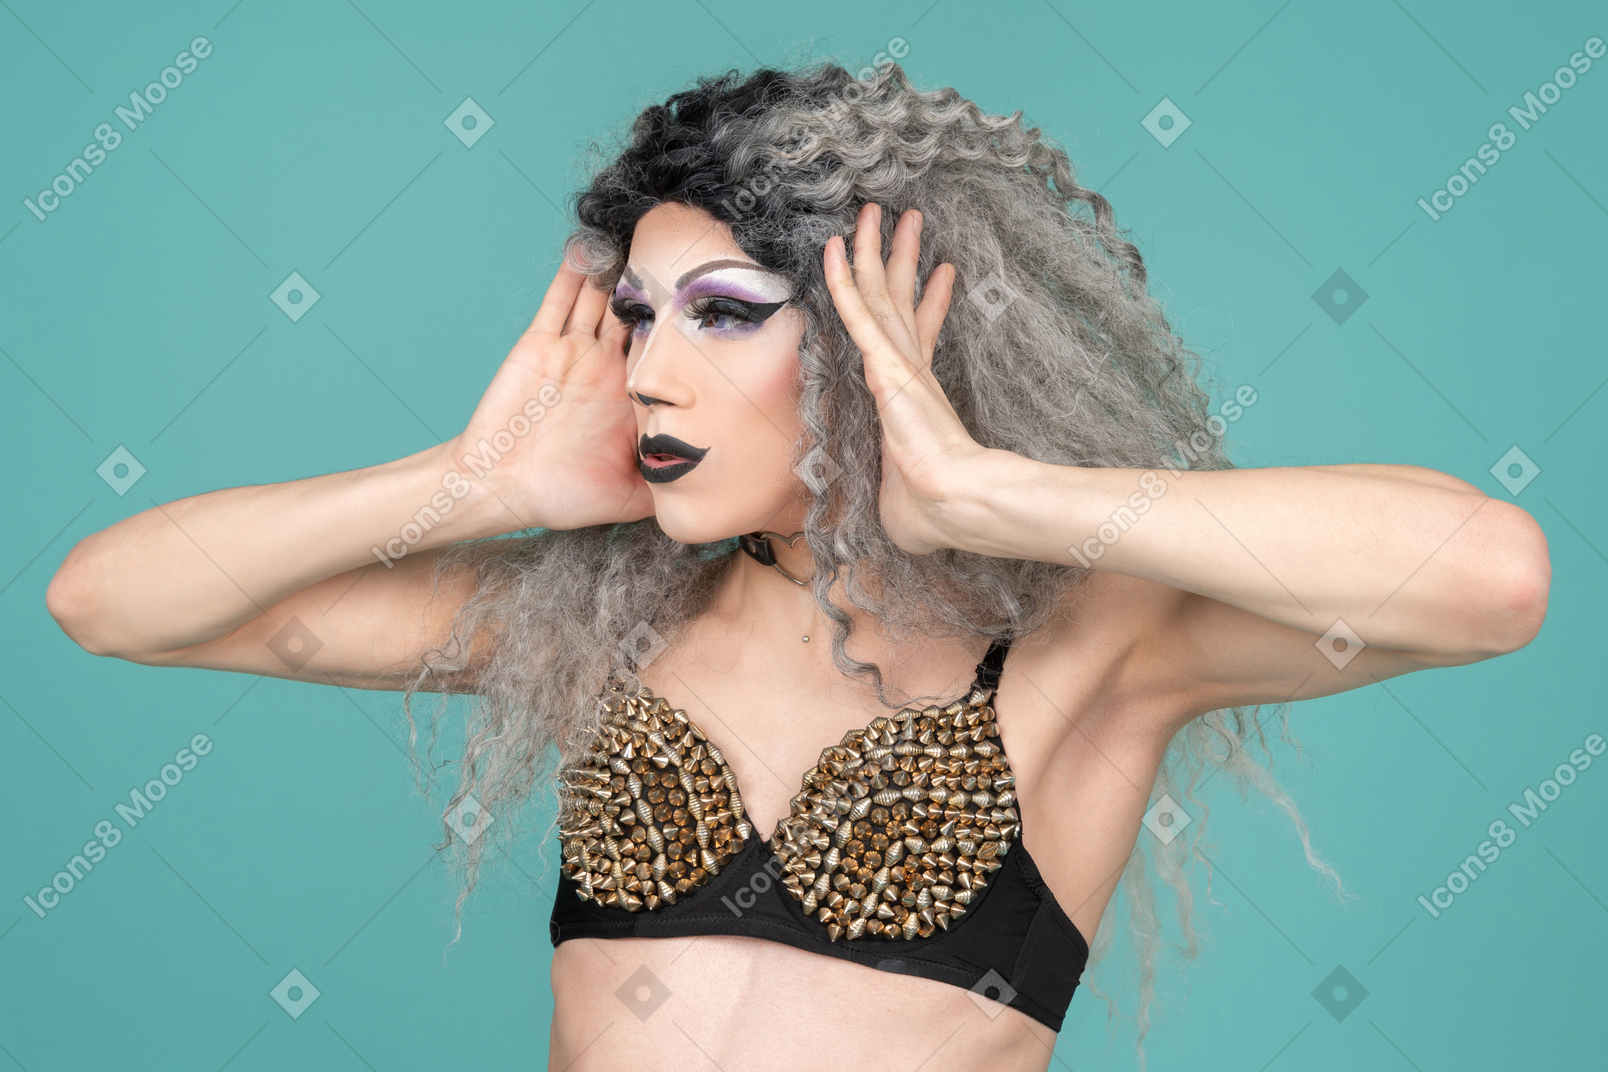 Drag queen holding their face with both hands